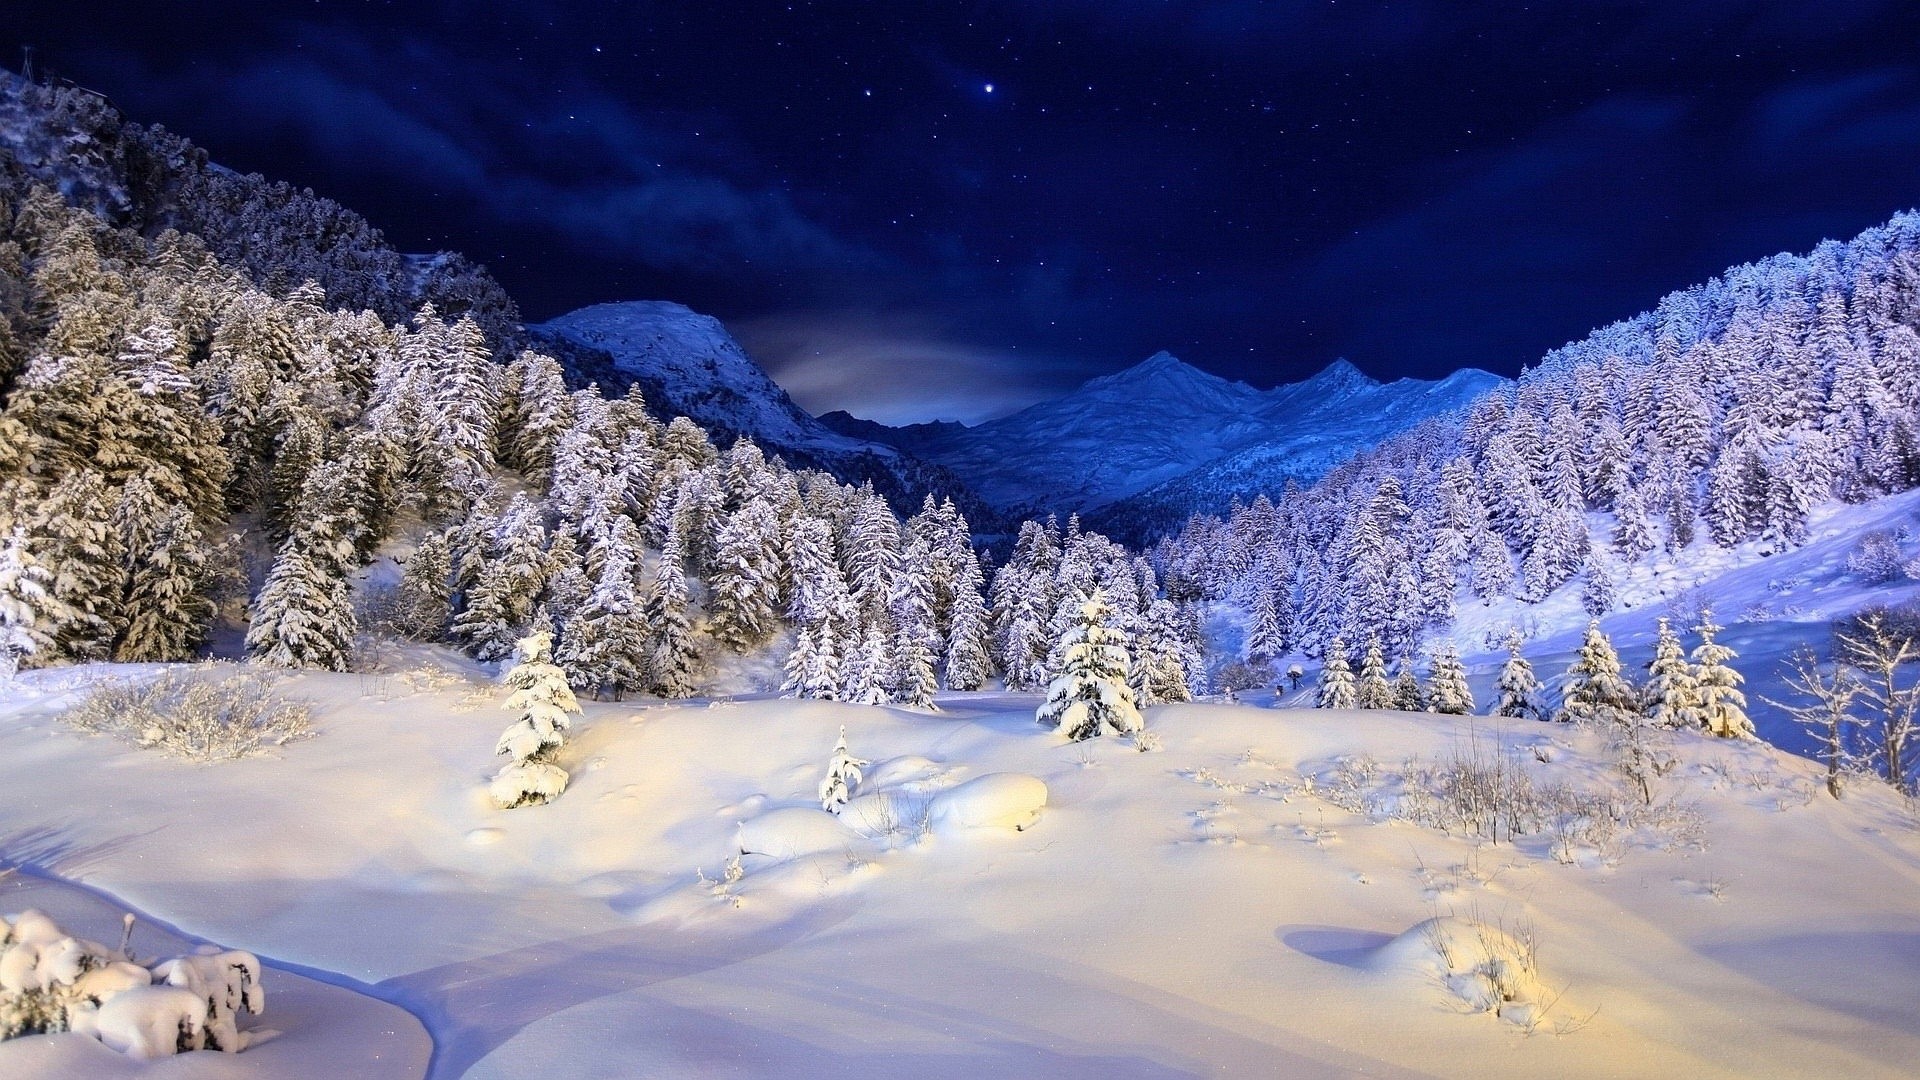 Donate to NocNoc  Iphone wallpaper mountains Mountains aesthetic Winter  scenery